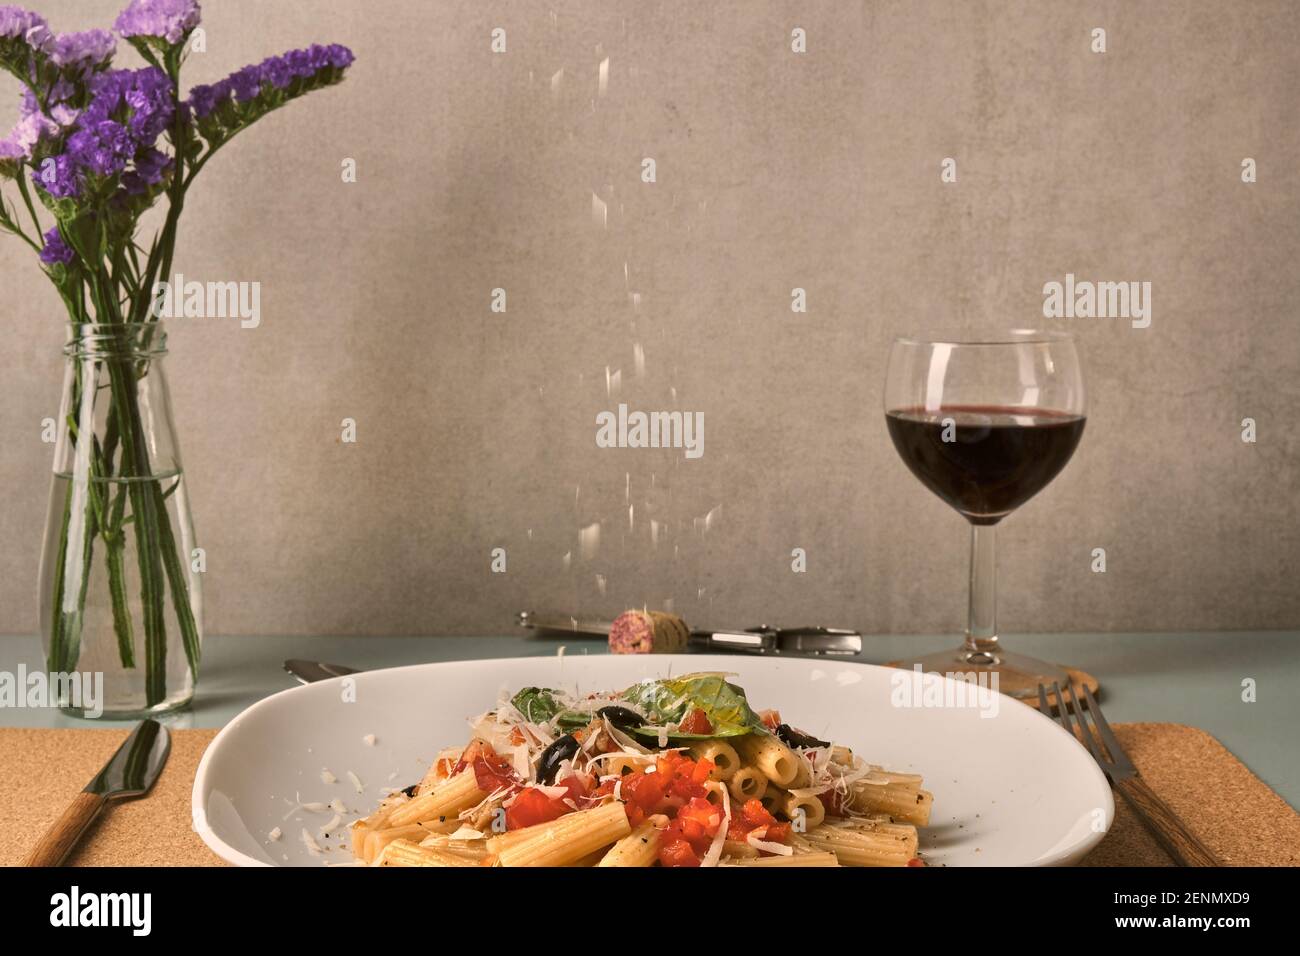 Pasta and red wine, sunday like flavour Stock Photo